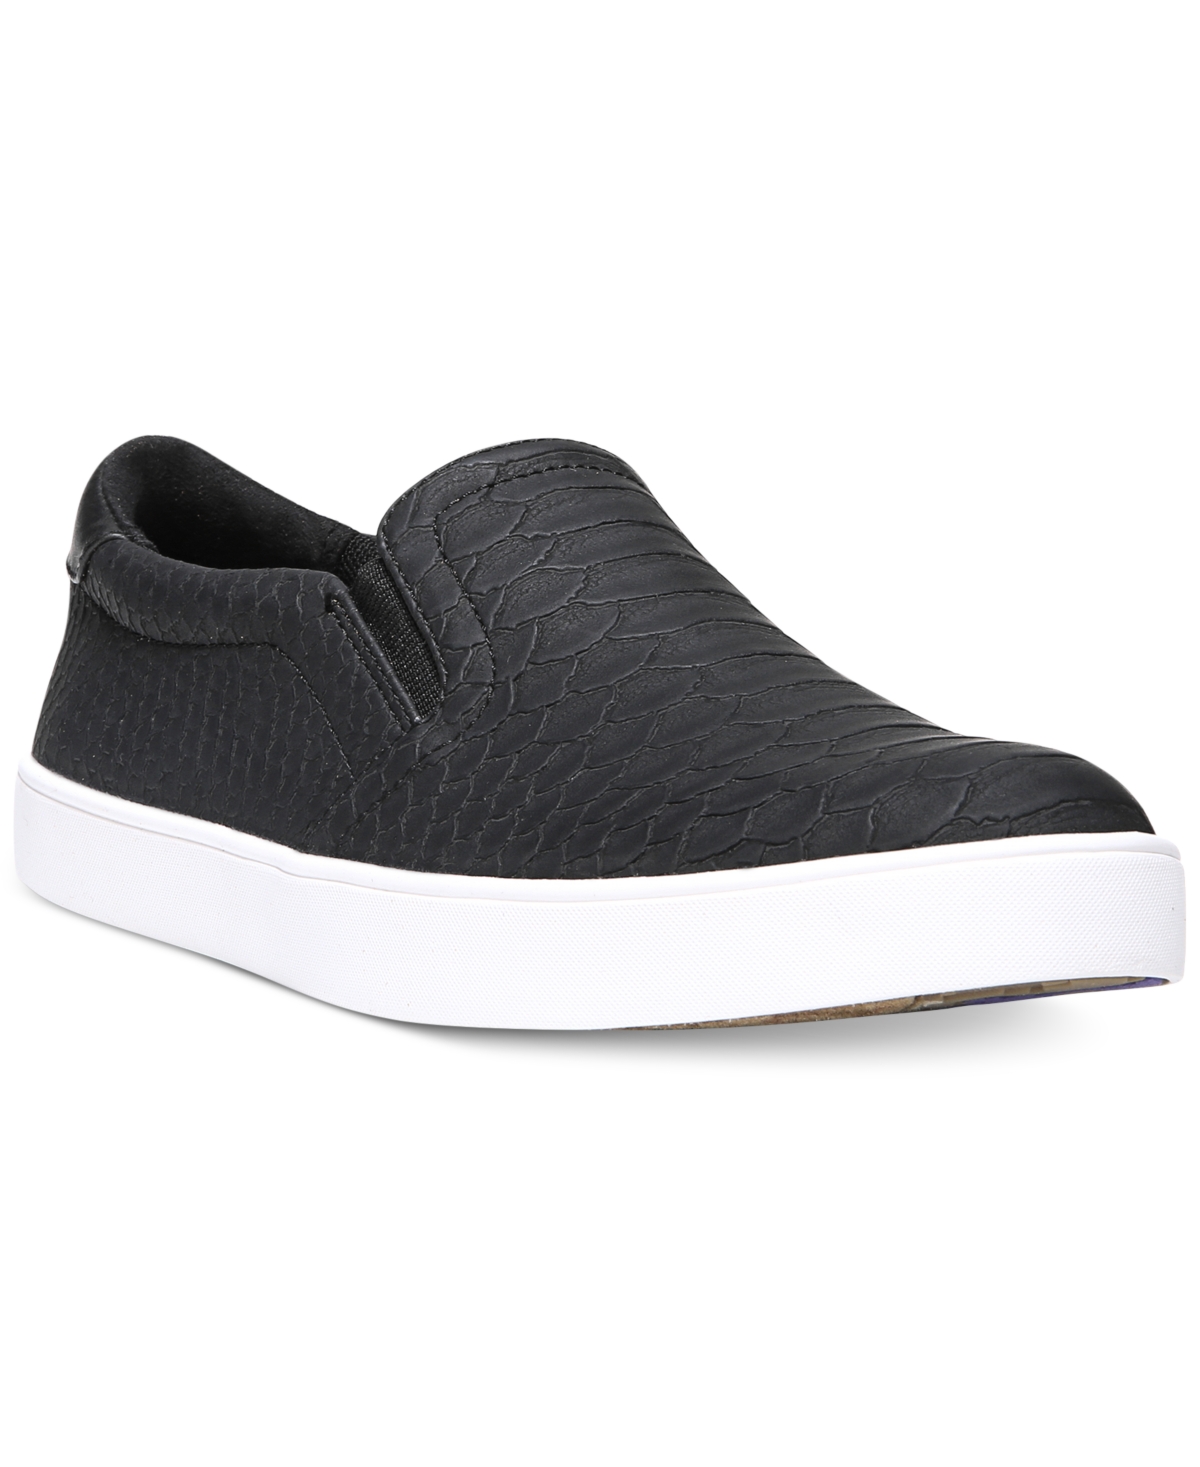 UPC 727679380263 product image for Dr. Scholl's Women's Madison Slip on Sneakers Women's Shoes | upcitemdb.com